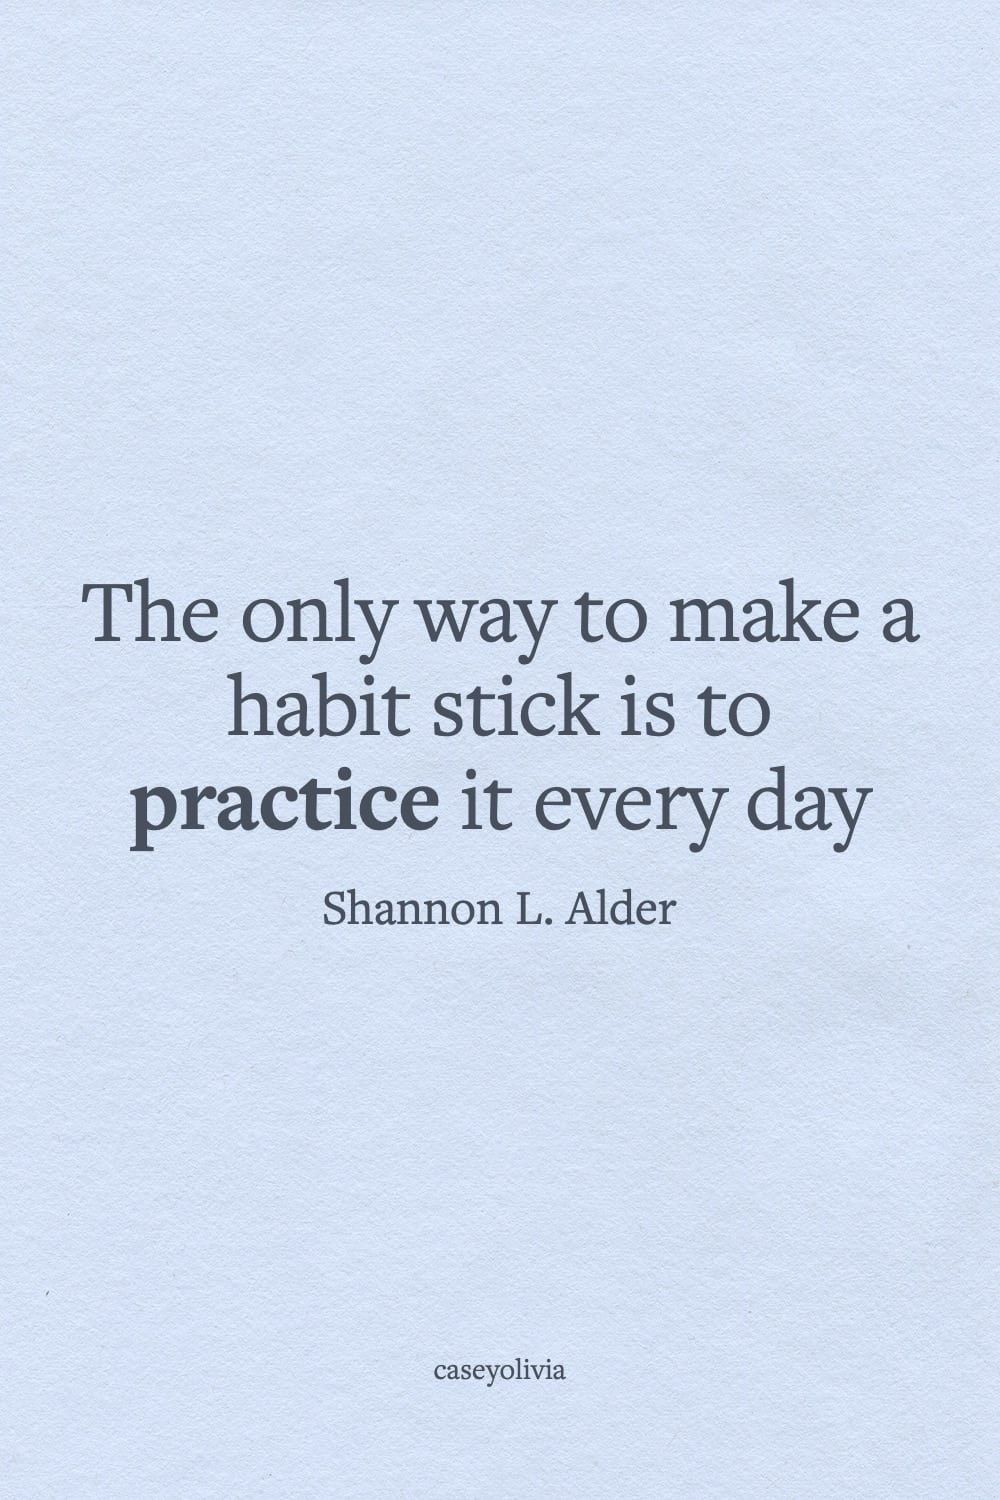 shannon l alder practice every day inspirational caption